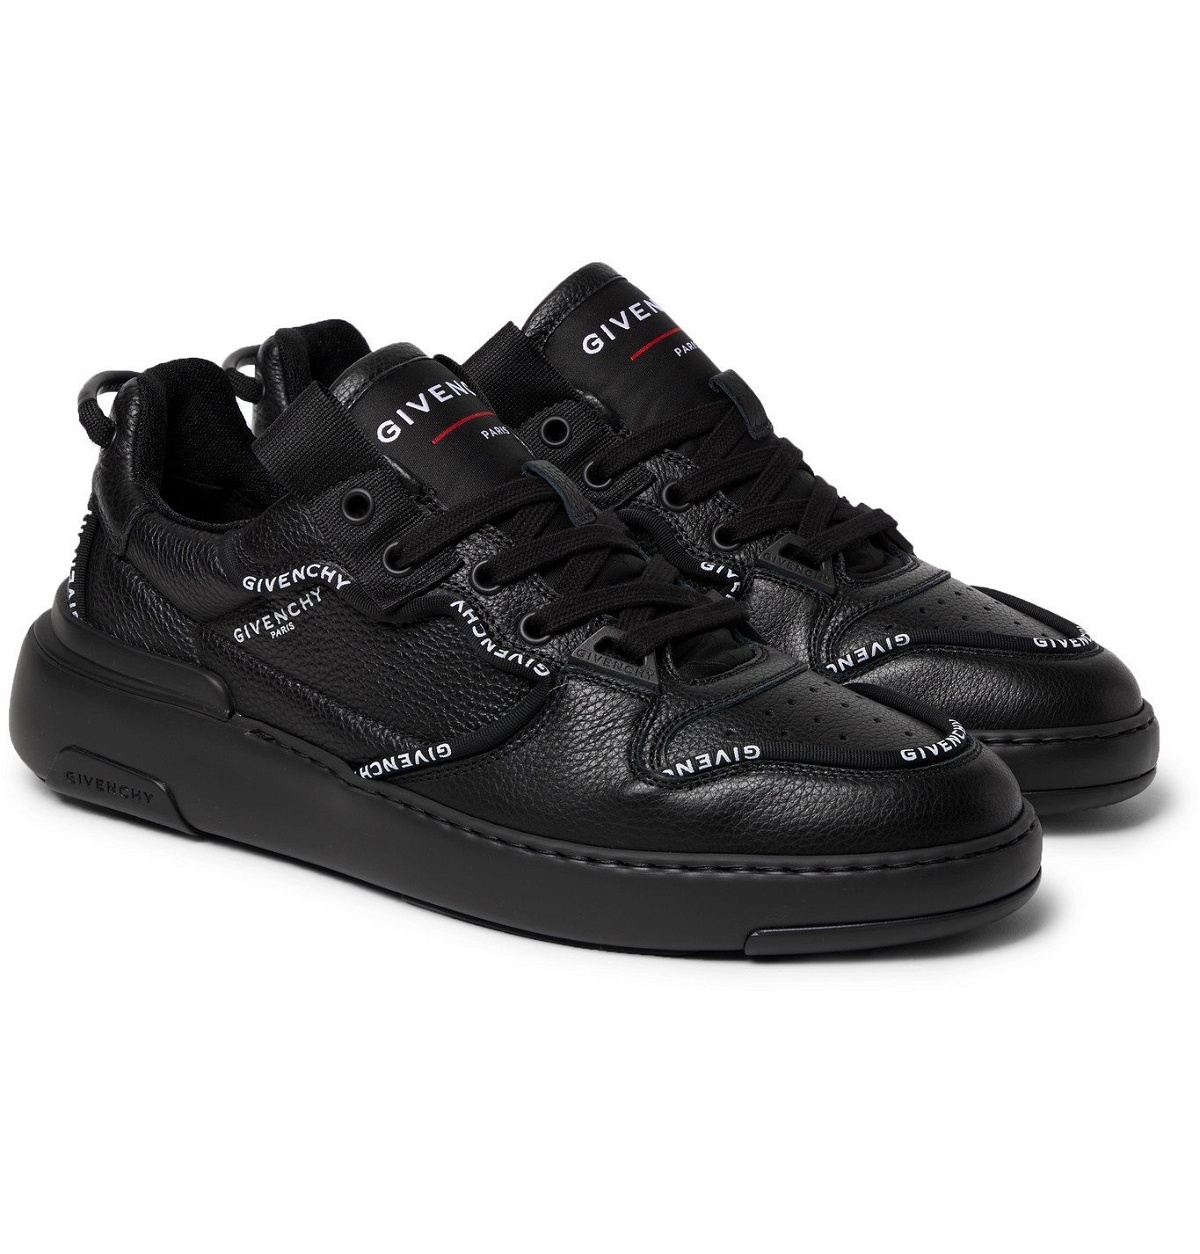 GIVENCHY - Wing Logo-Print Full-Grain Leather Sneakers - Black Givenchy